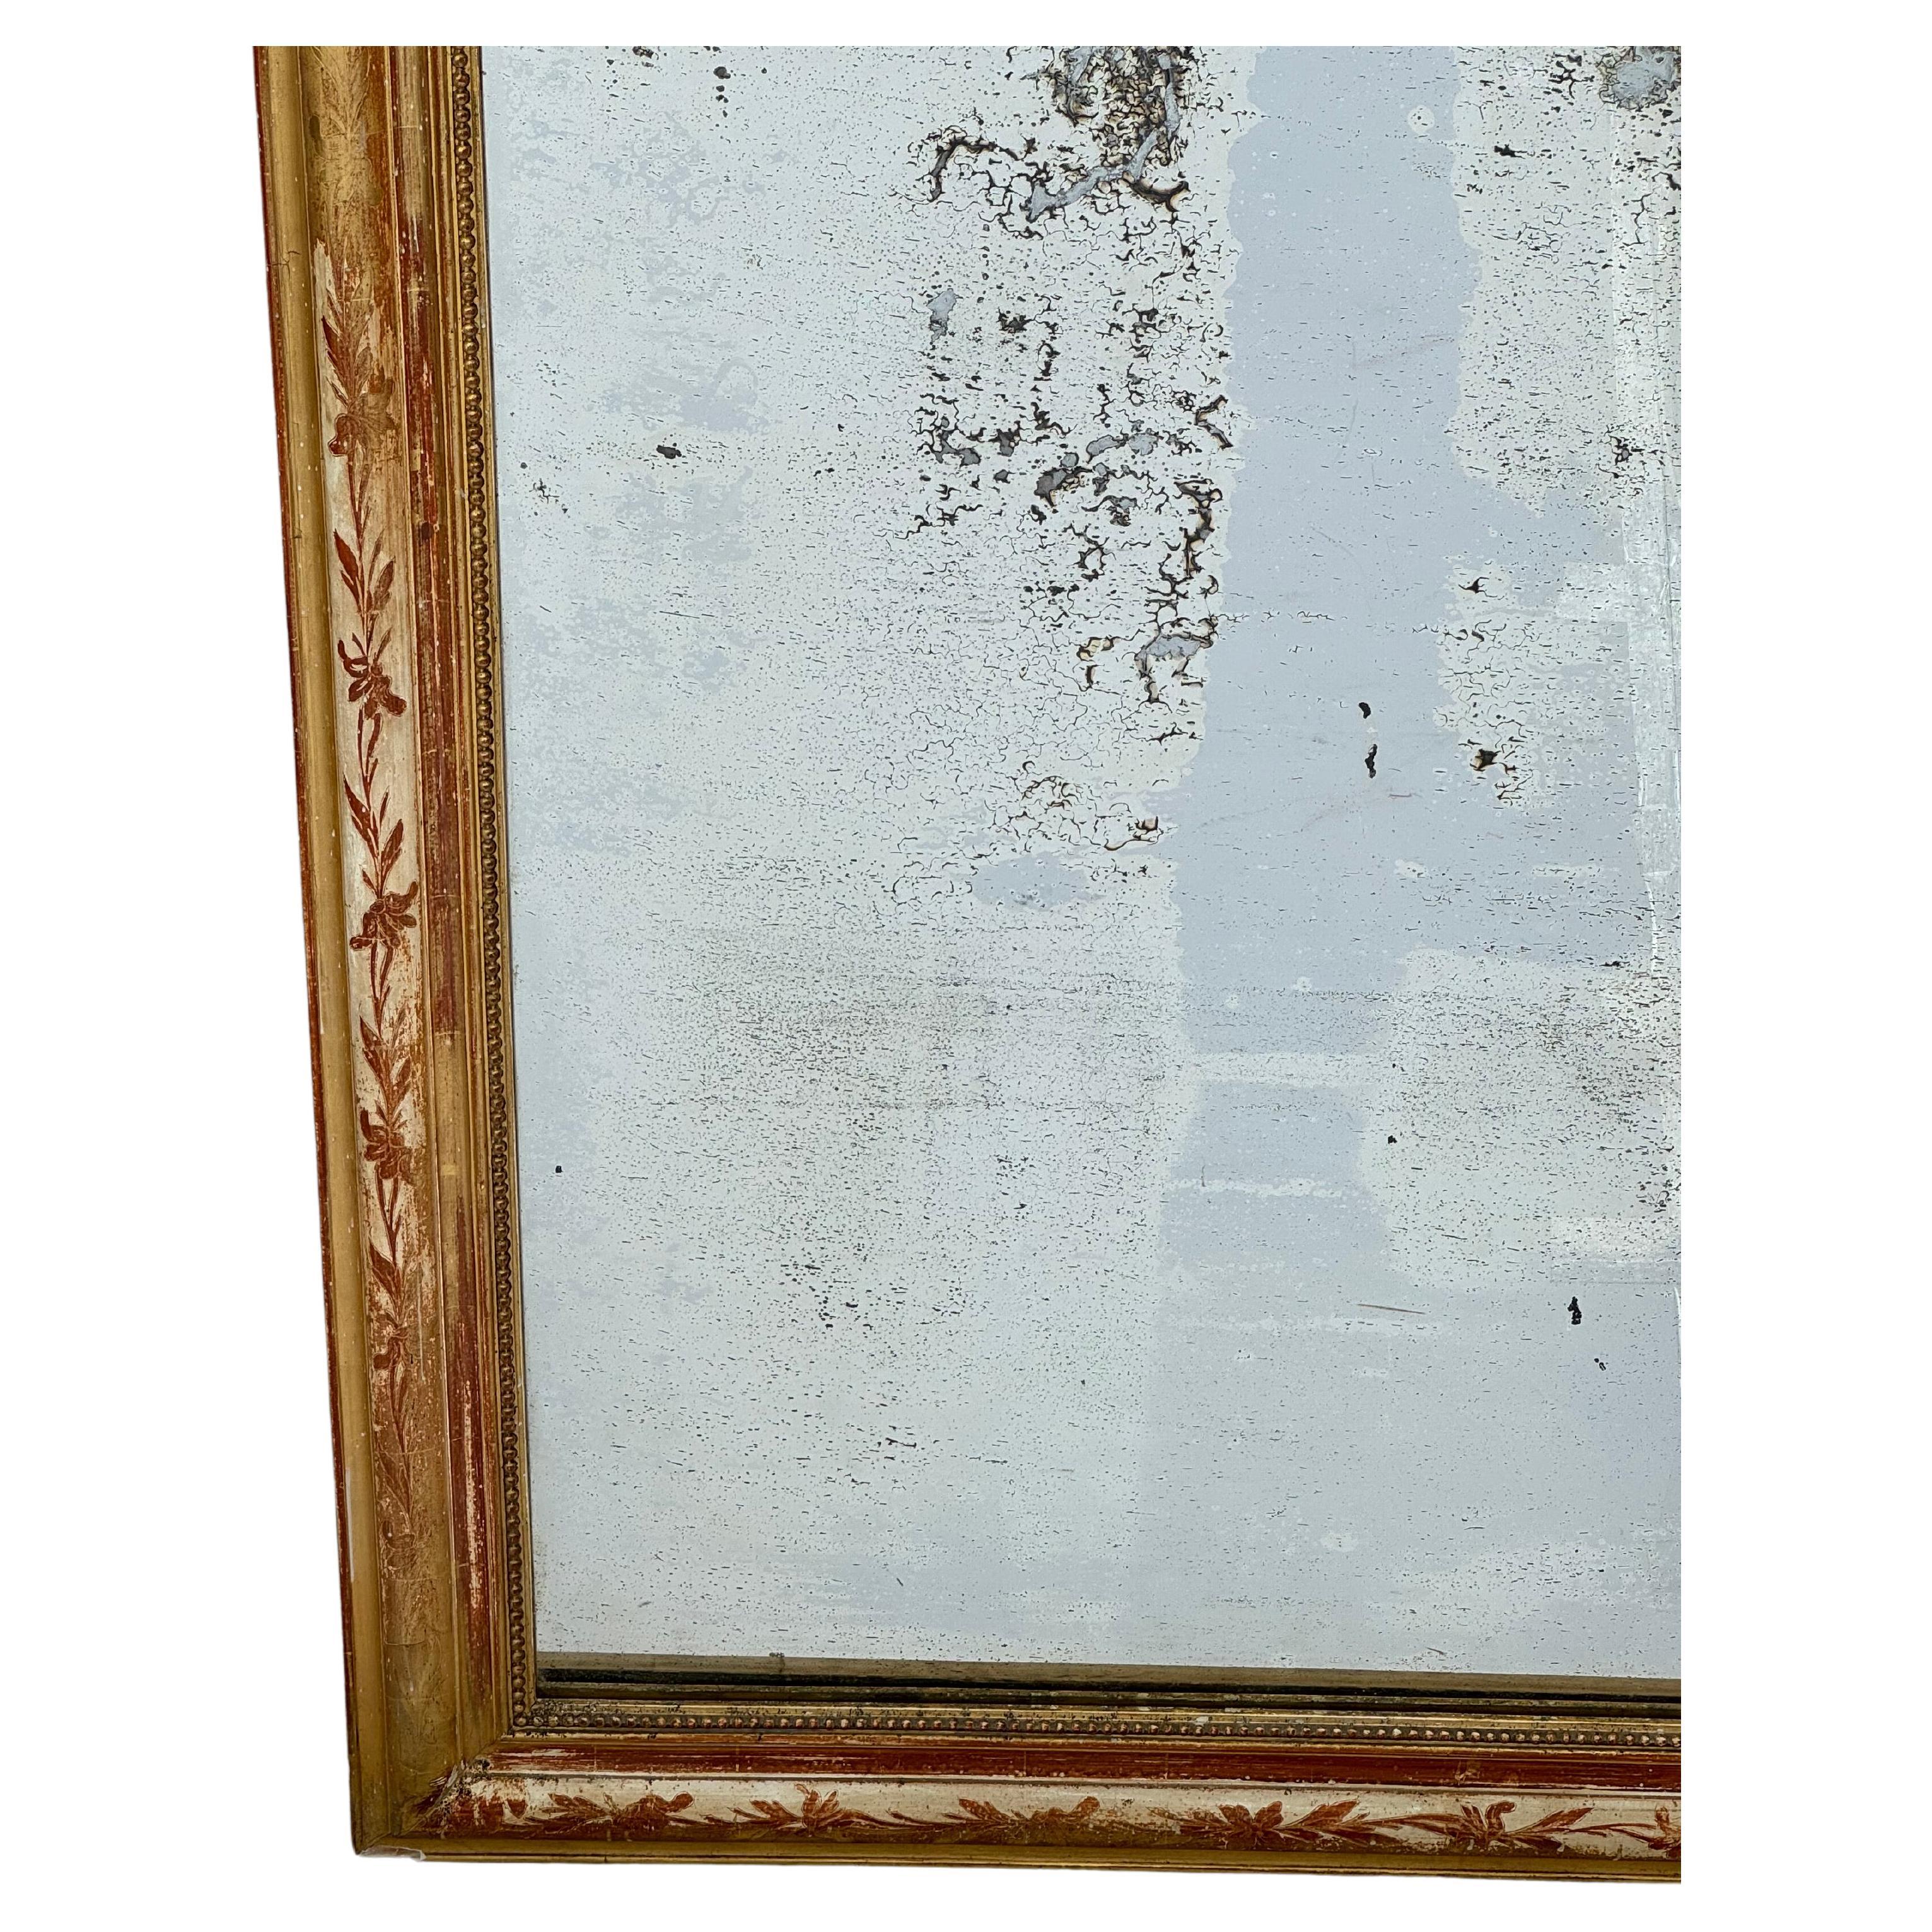 Louis Philippe mirrors are known for their rounded top corners and subtle embellishments to the frame. This fine large scale Classic example is surrounded by a lovely gilt frame. Frame has a lovely floral motif etched into the gilt.